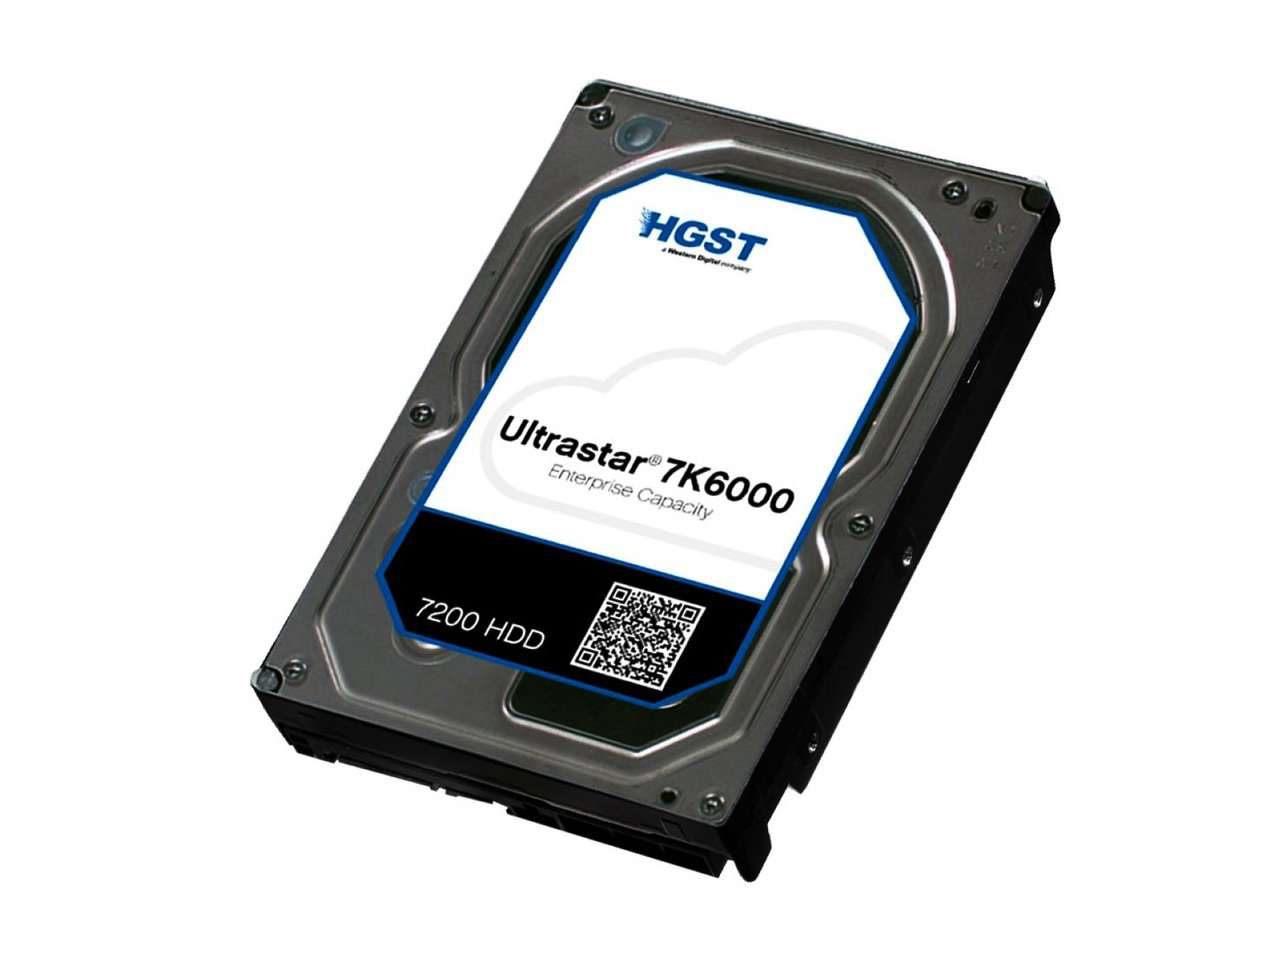 HGST Ultrastar 7K6000 0F22829  HUS726020AL5215 2TB 7.2K RPM SAS 12Gb/s 512e 128MB Cache 3.5" TCG FIPS HDD